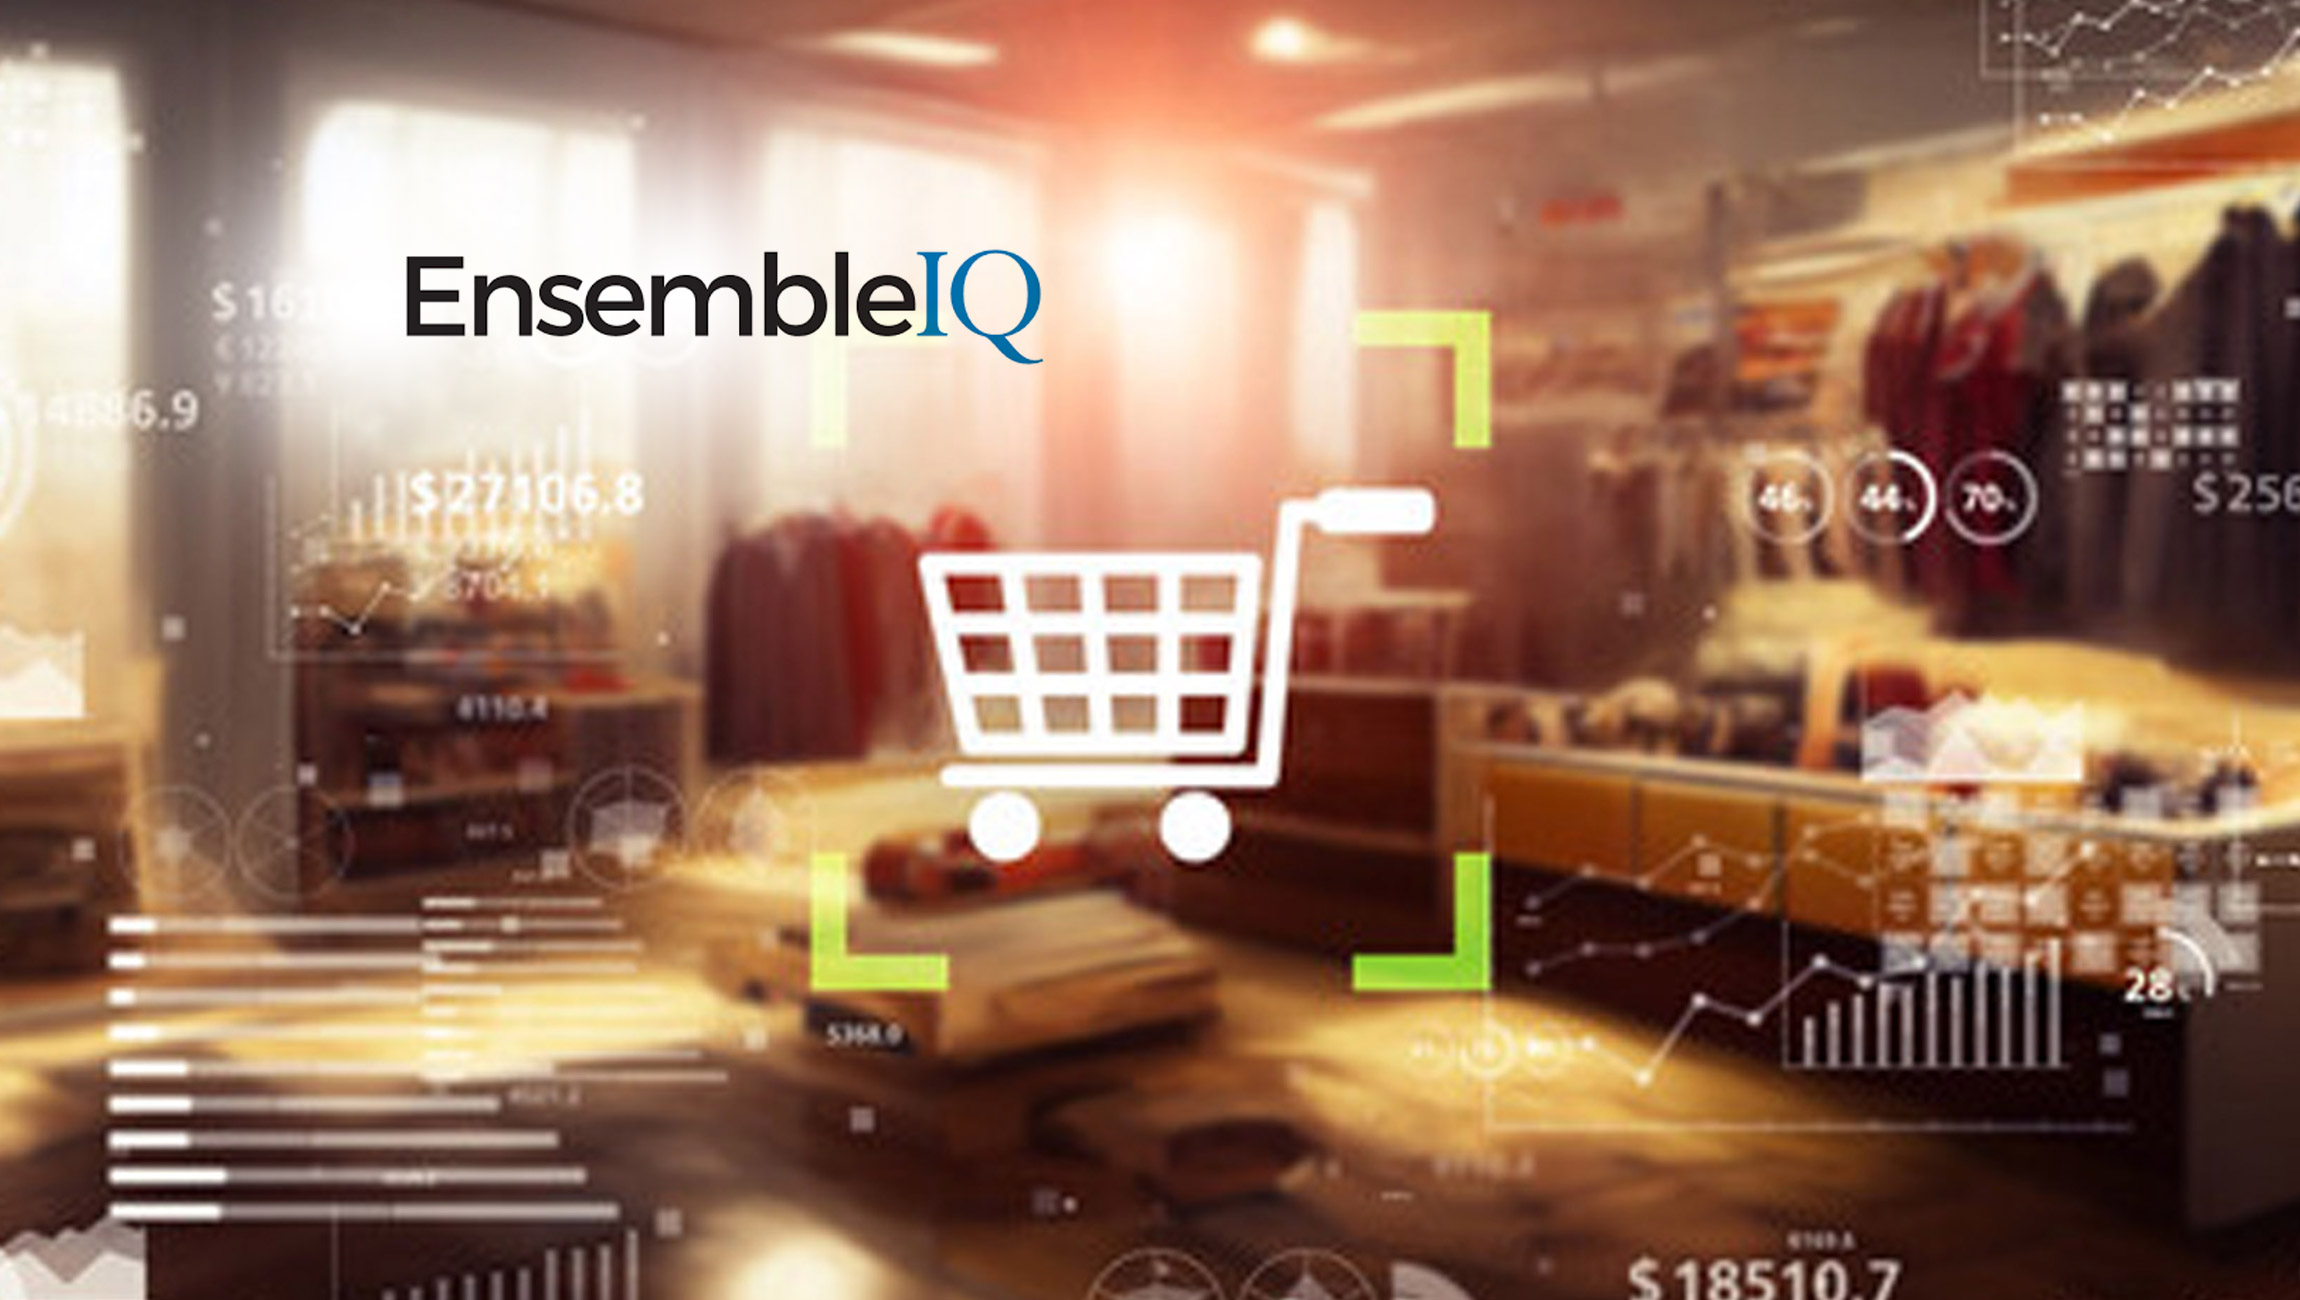 EnsembleIQ Launches Retail Leader Pro Premium Subscription Product, Providing Deep Retail Intelligence and Analysis From Industry Experts Across Retail Channels